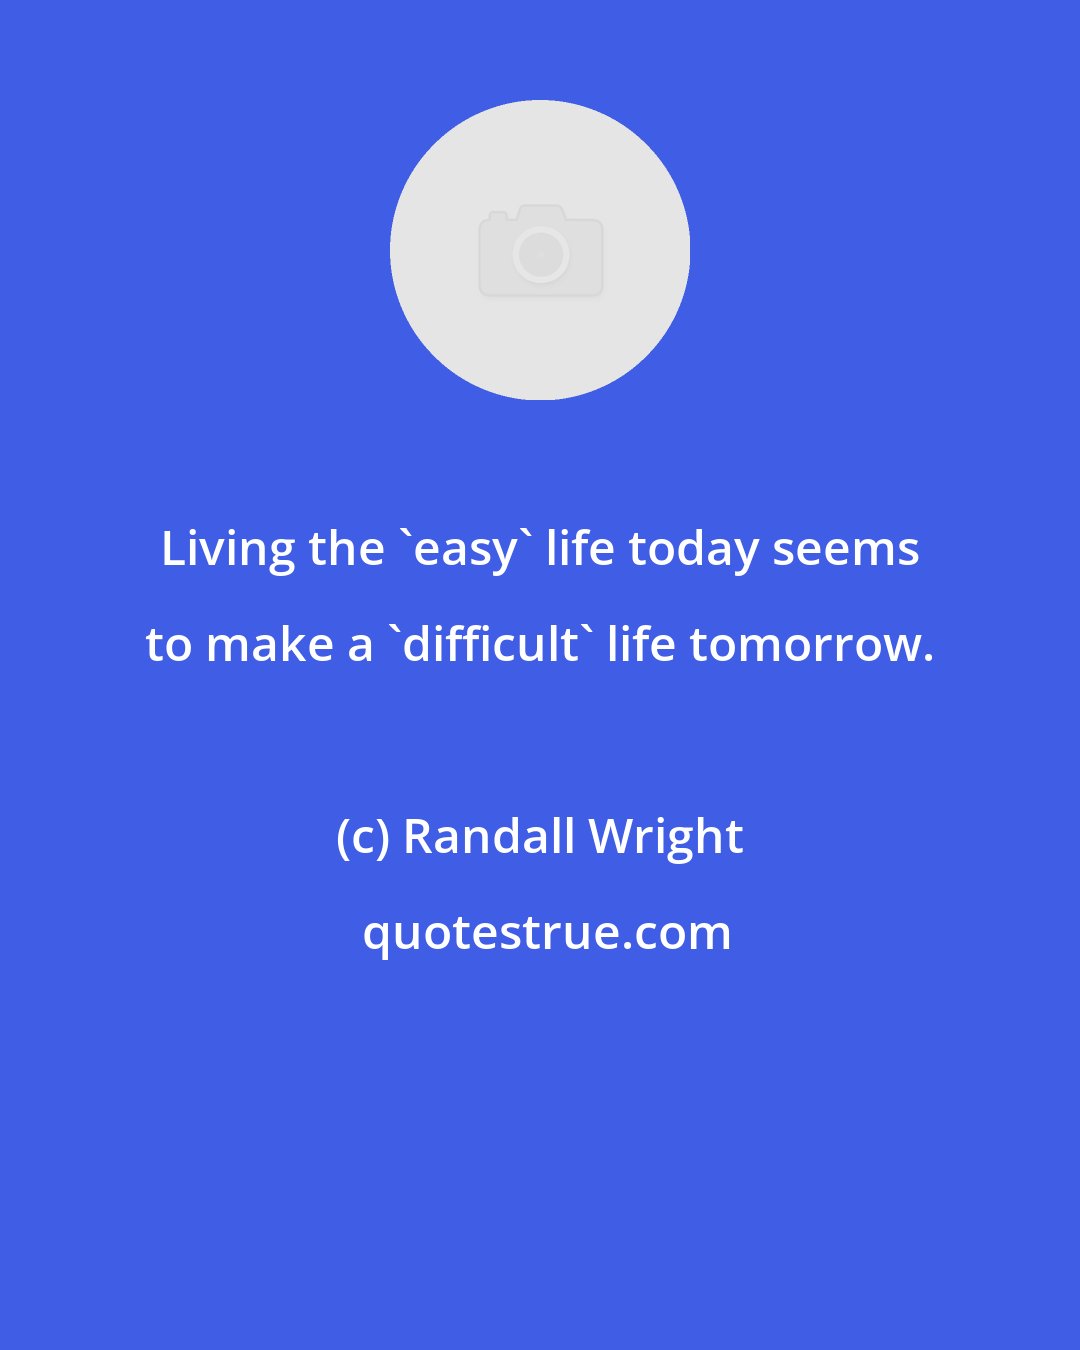 Randall Wright: Living the 'easy' life today seems to make a 'difficult' life tomorrow.